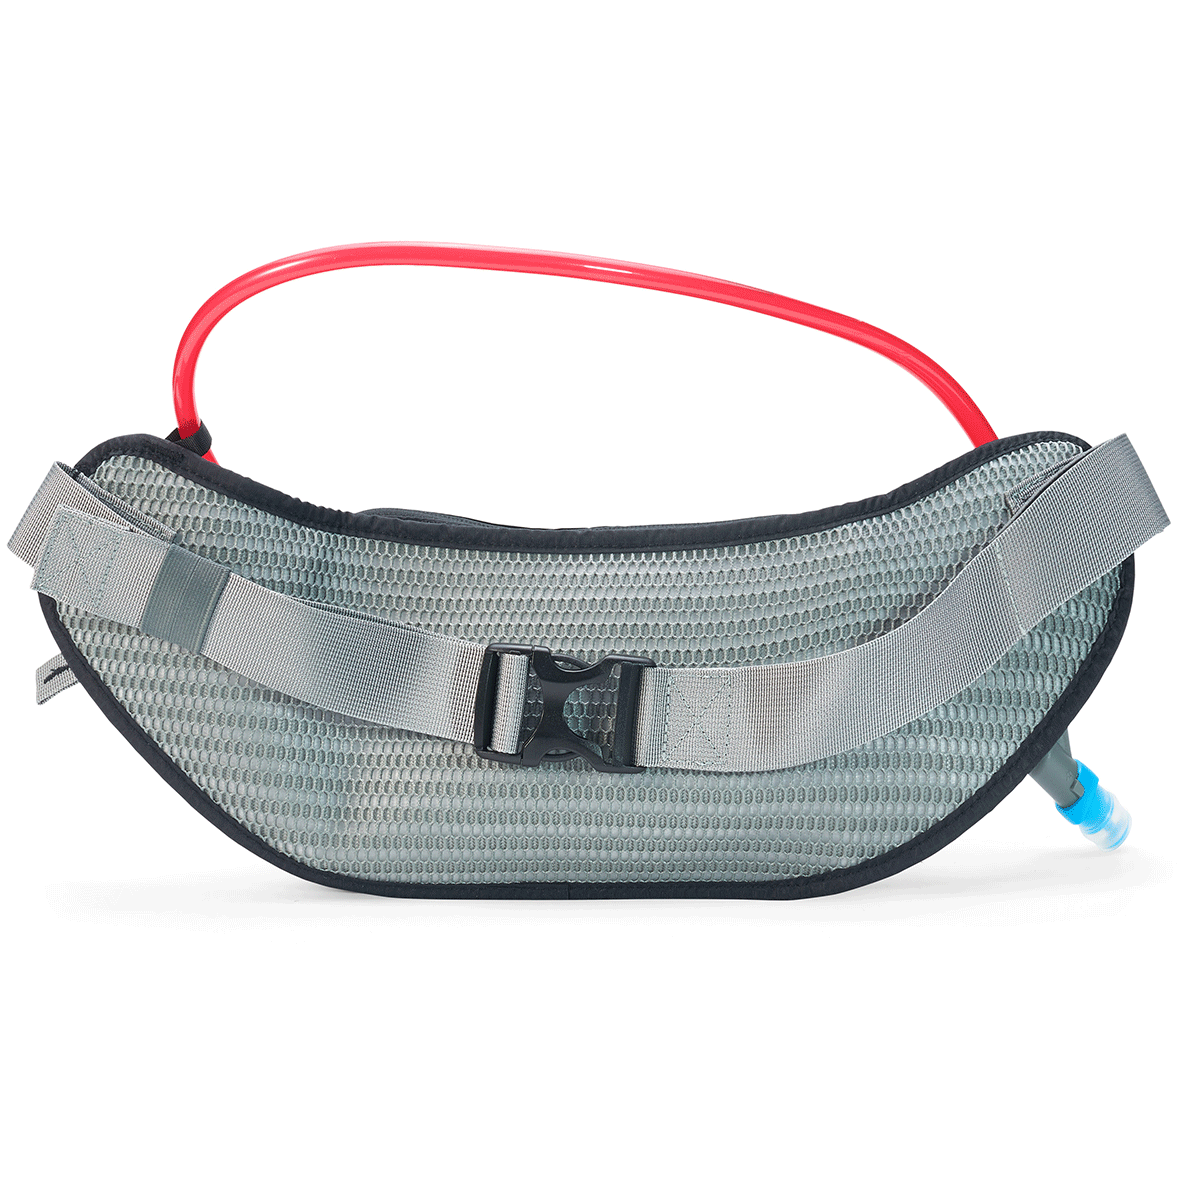 USWE ZULO 6L HYDRATION WAST PACK 1.5L